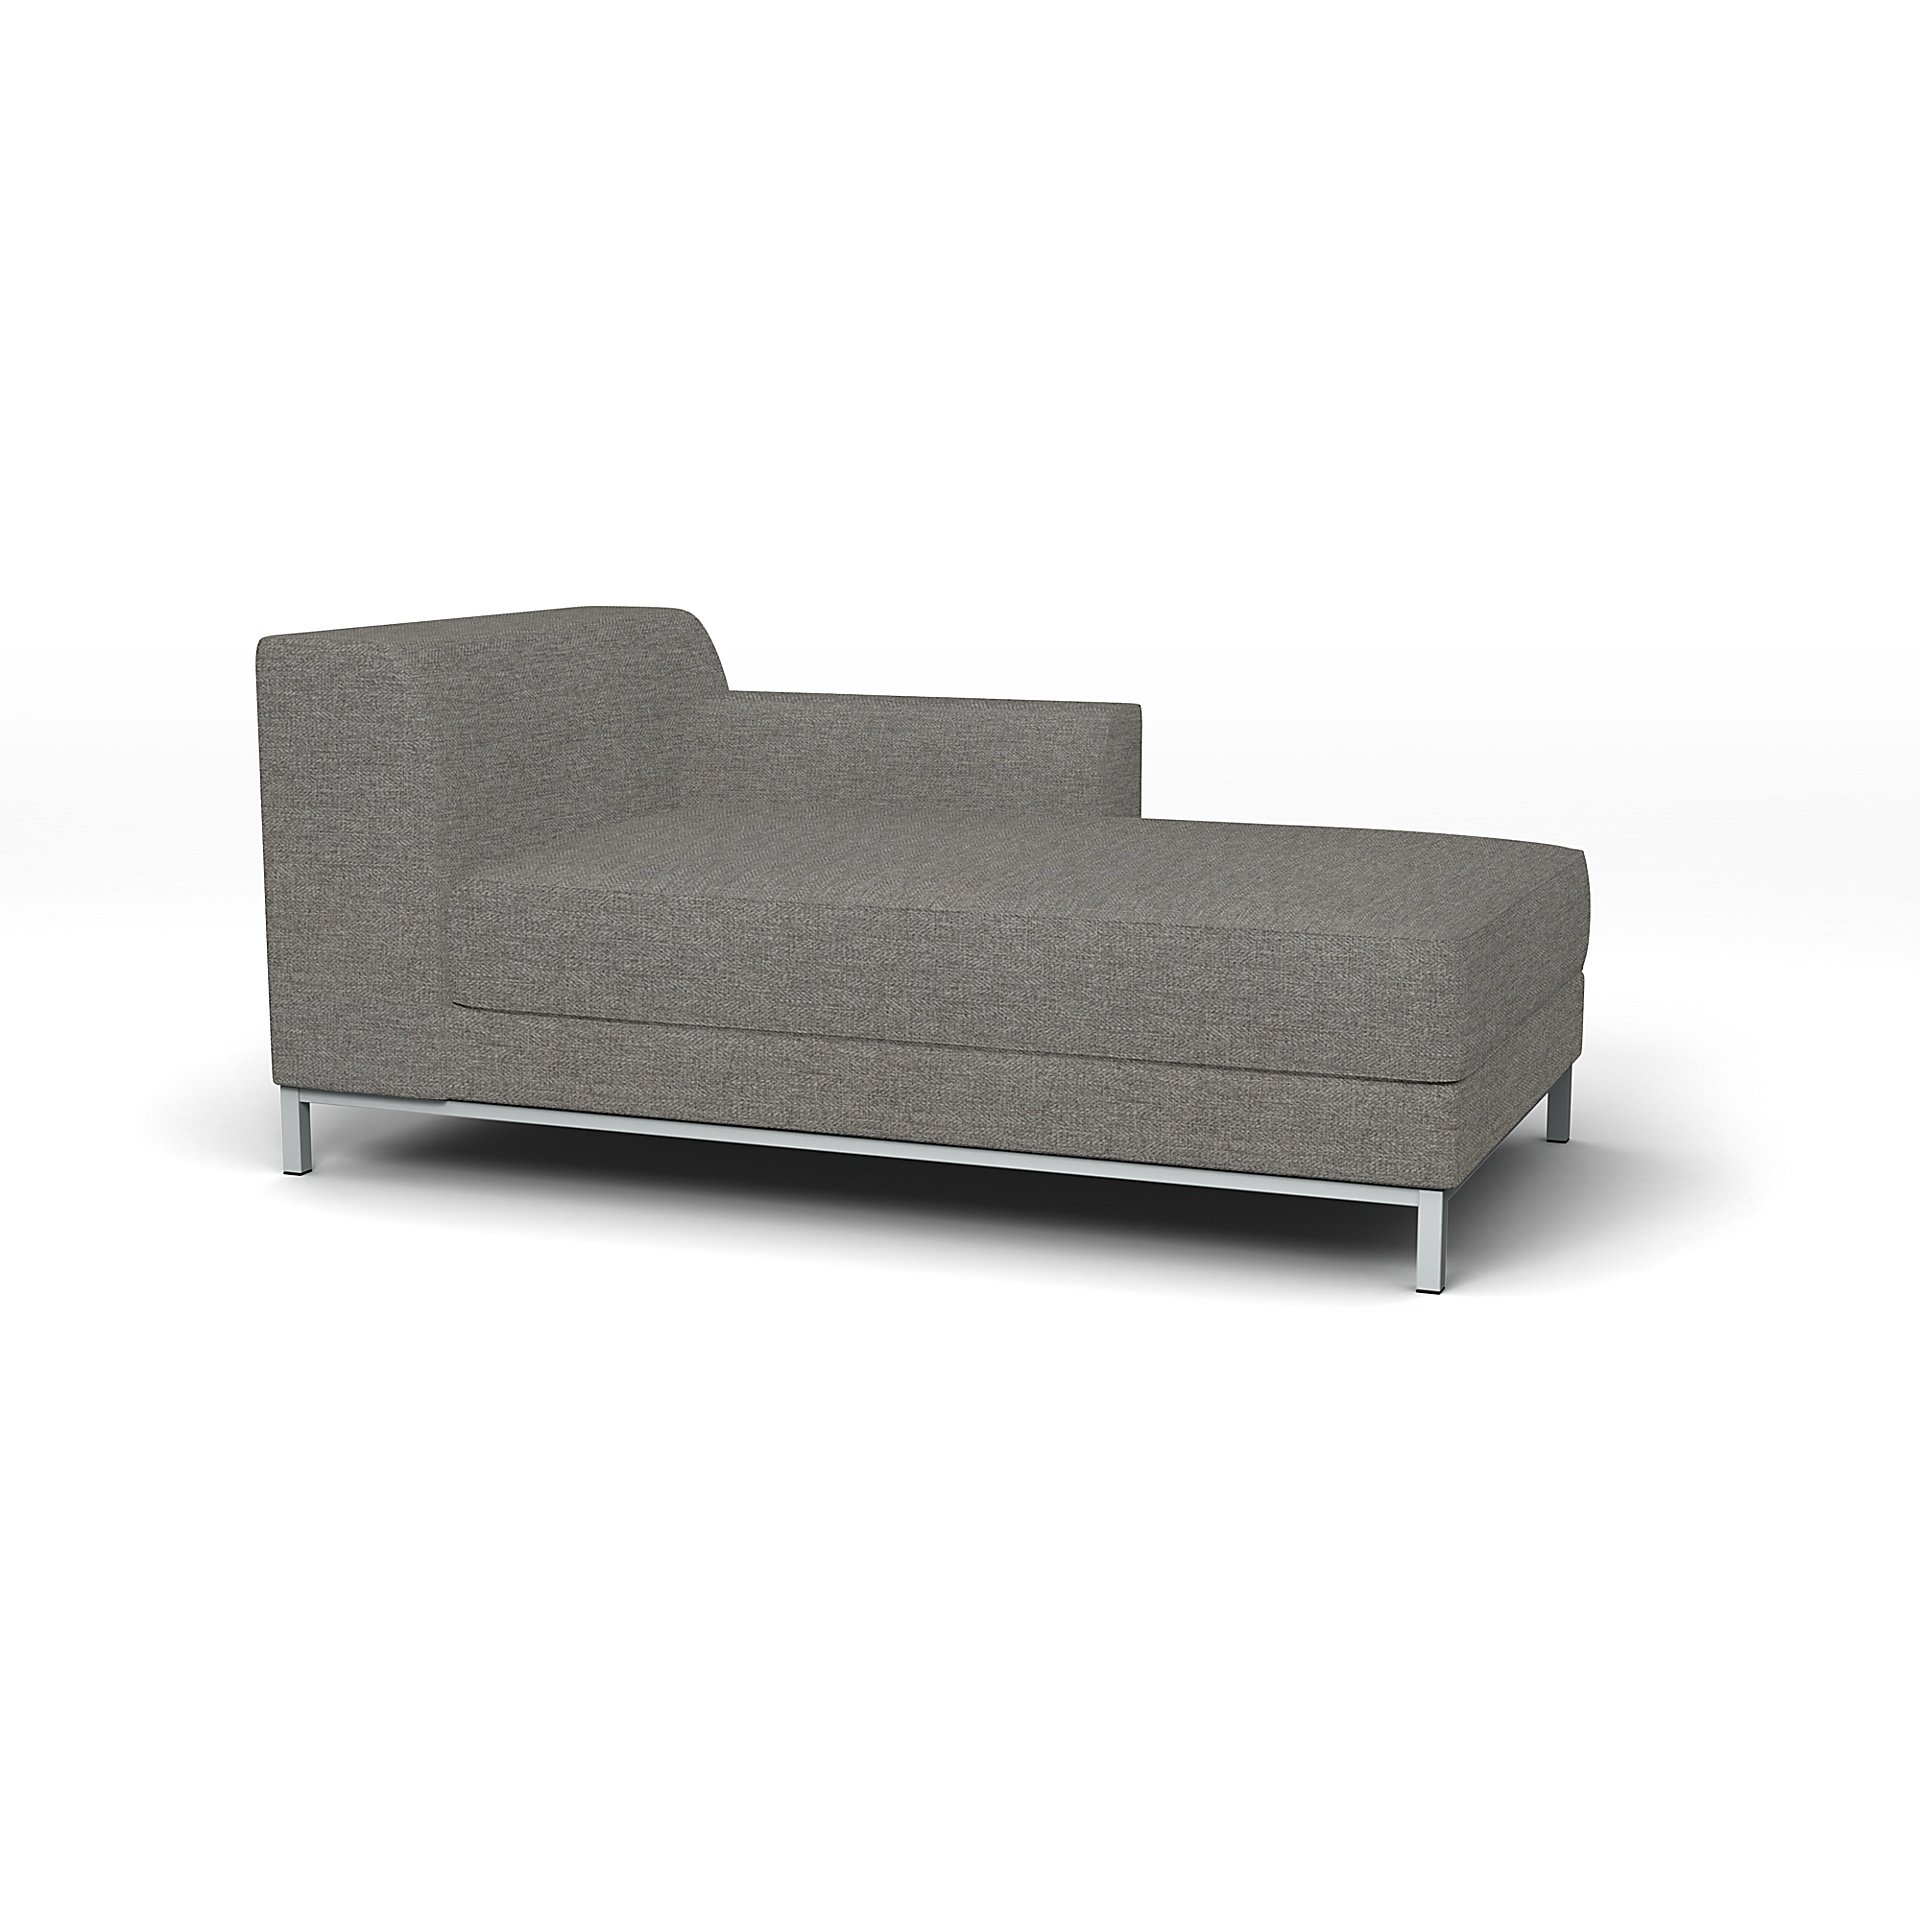 IKEA - Kramfors Chaise Longue with Right Arm Cover, Taupe, Boucle & Texture - Bemz